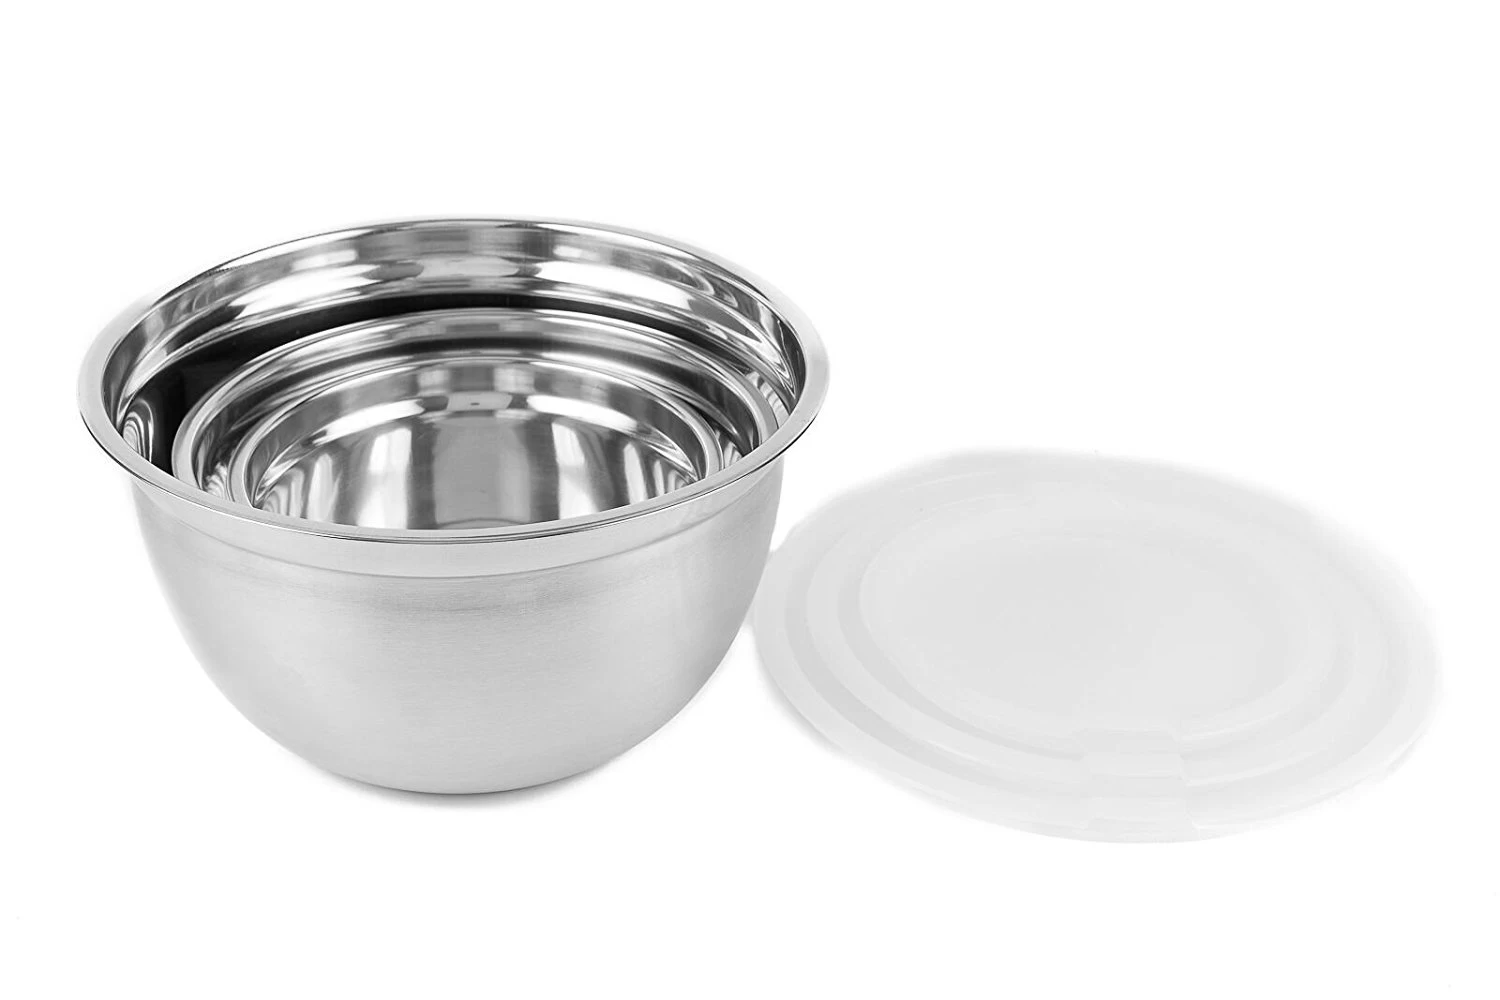 OEM Stainless Steel Mixing Bowl manufacturer, china Stainless Steel Housewares